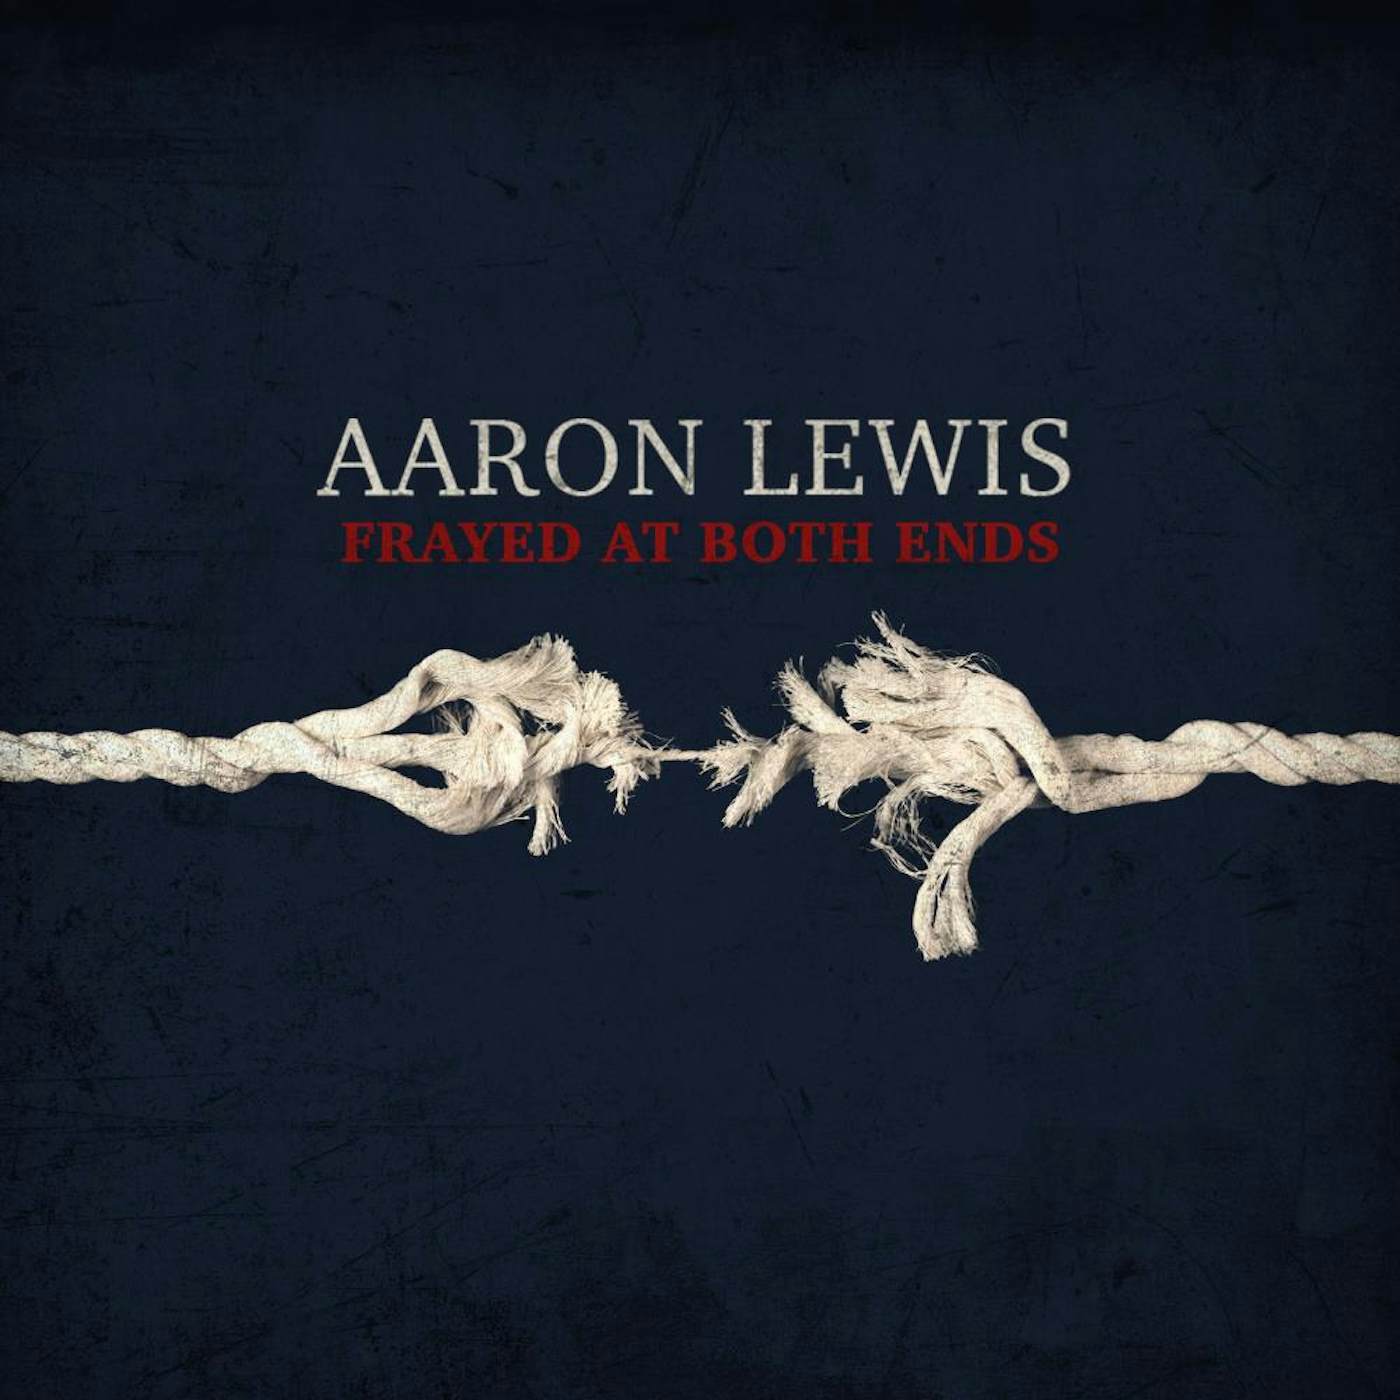 Aaron Lewis FRAYED AT BOTH ENDS (DELUXE) CD